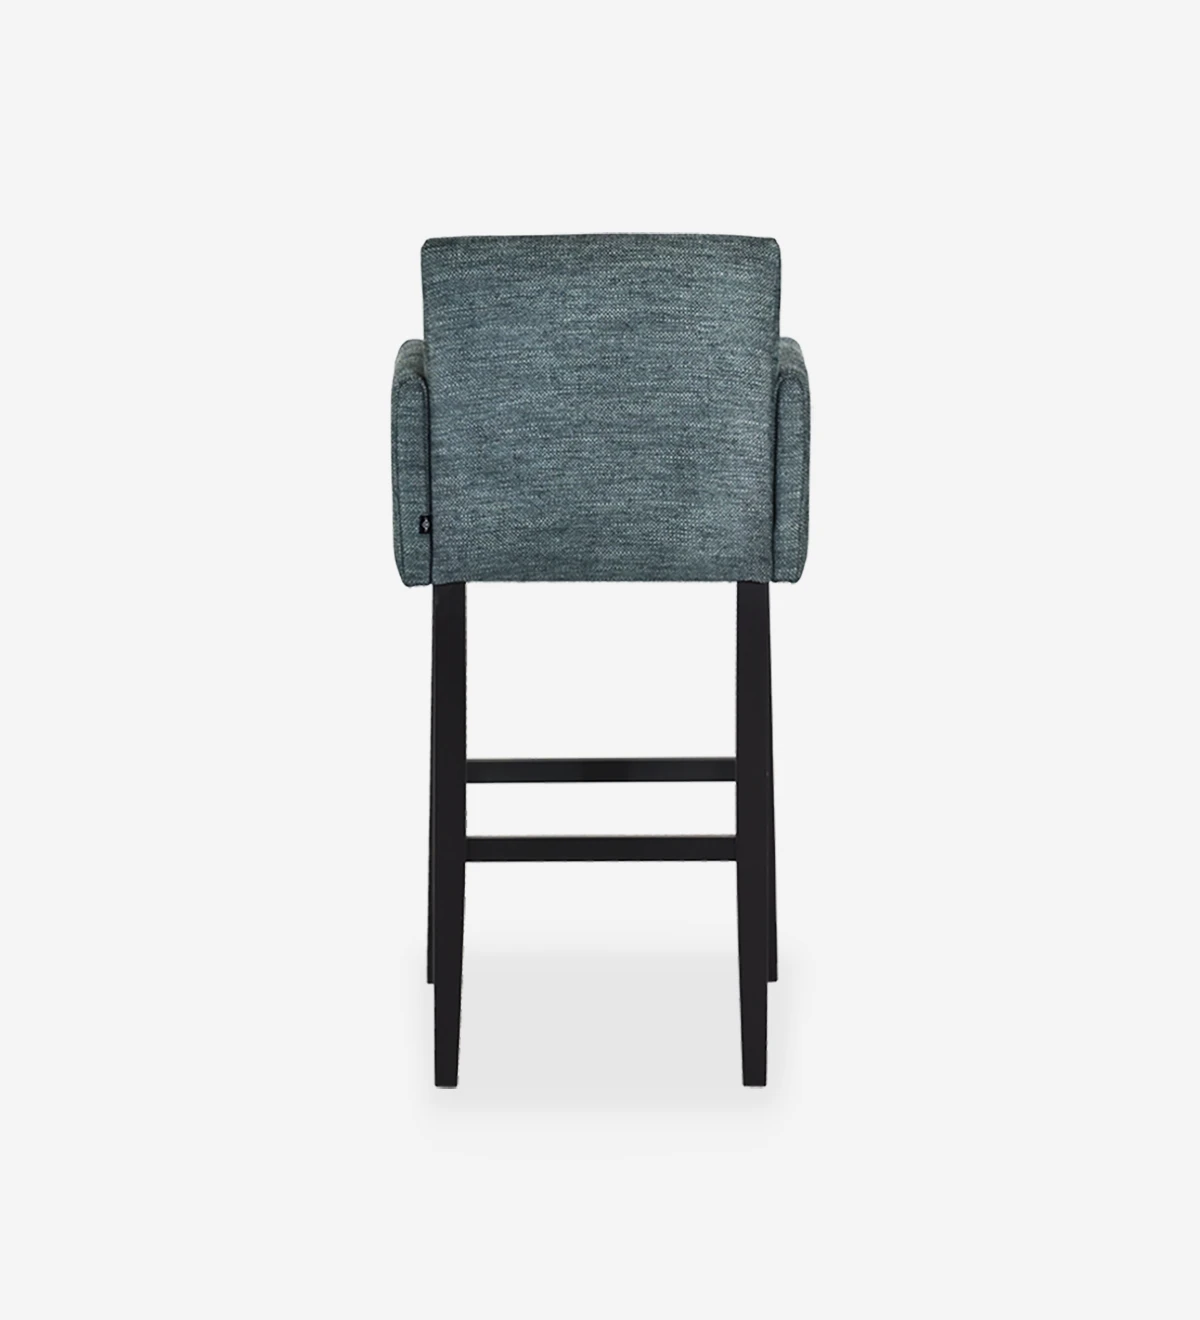 Stool with arms upholstered in fabric, with black lacquered feet.